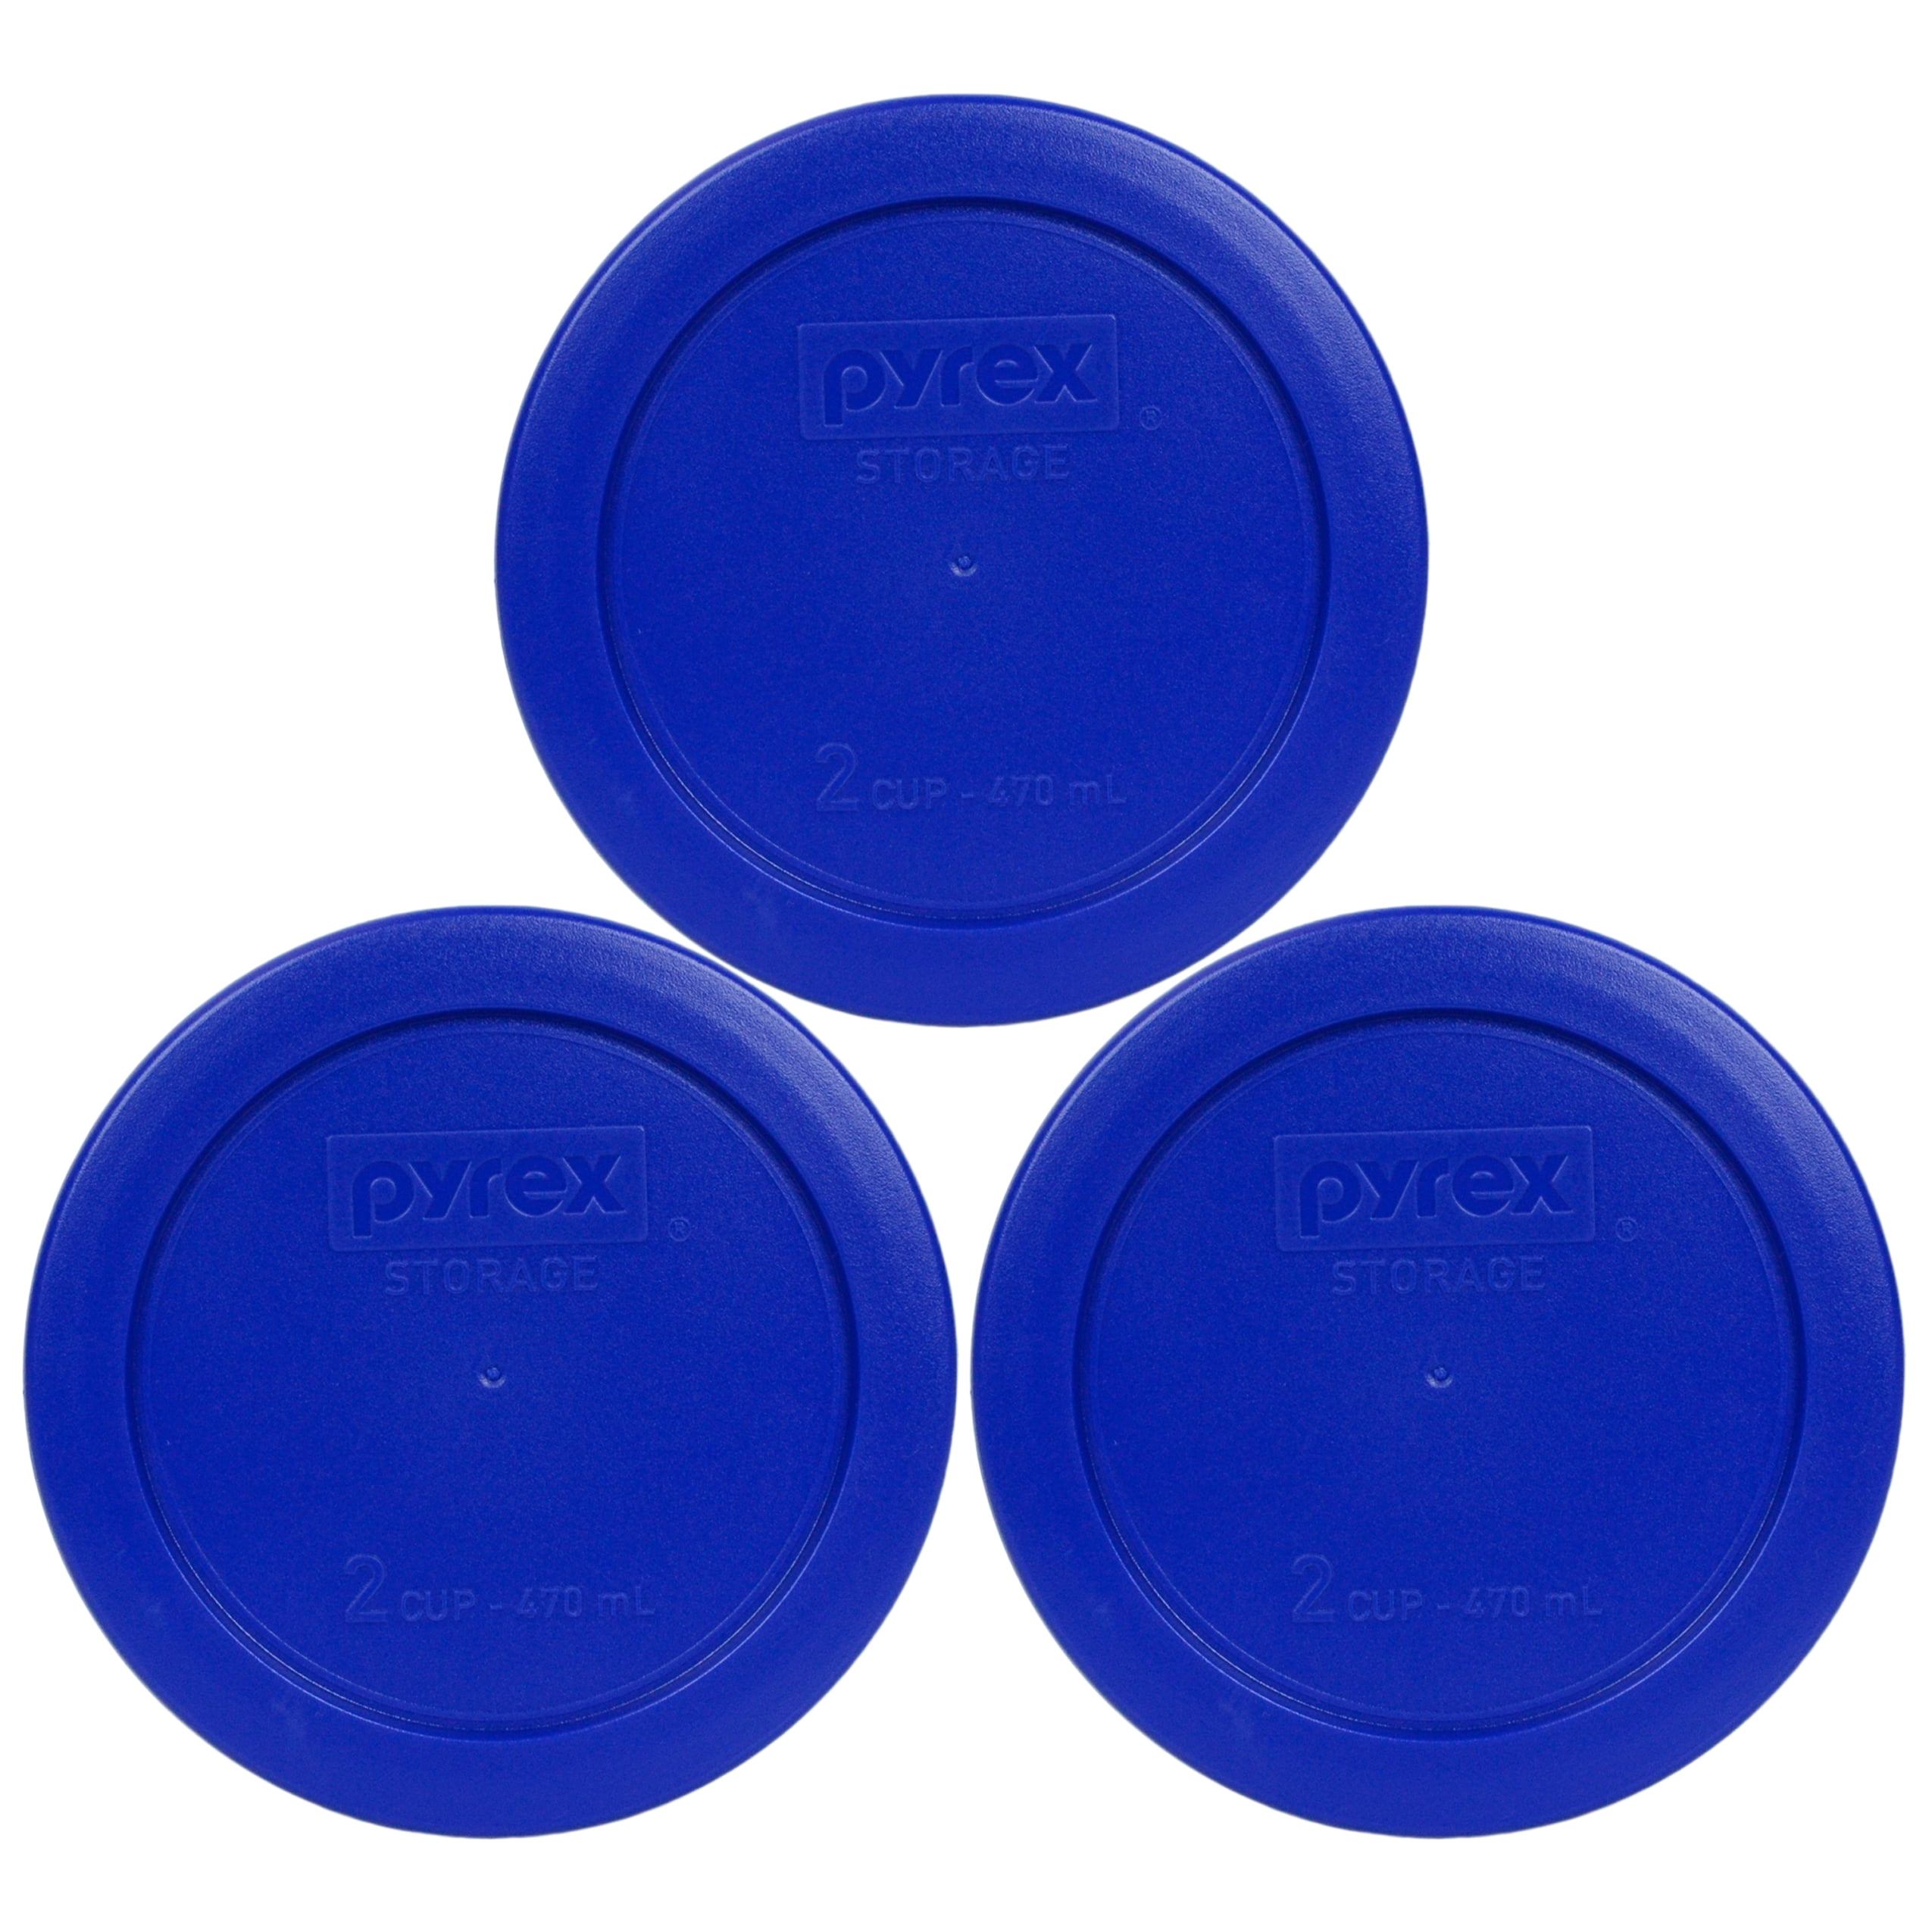 Pyrex 7200-PC White Round 2 Cup 5" Plastic Storage Lid Cover 6-Pack 